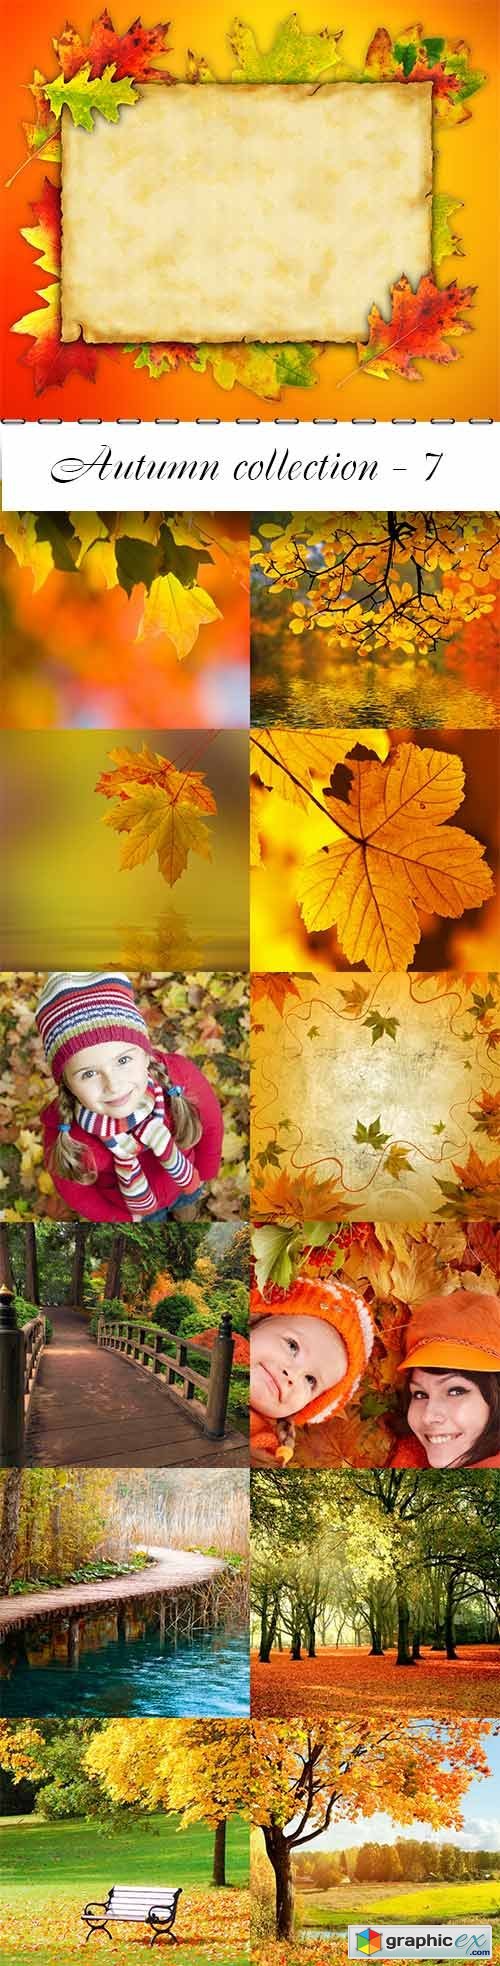 Autumn collection raster graphics - 7